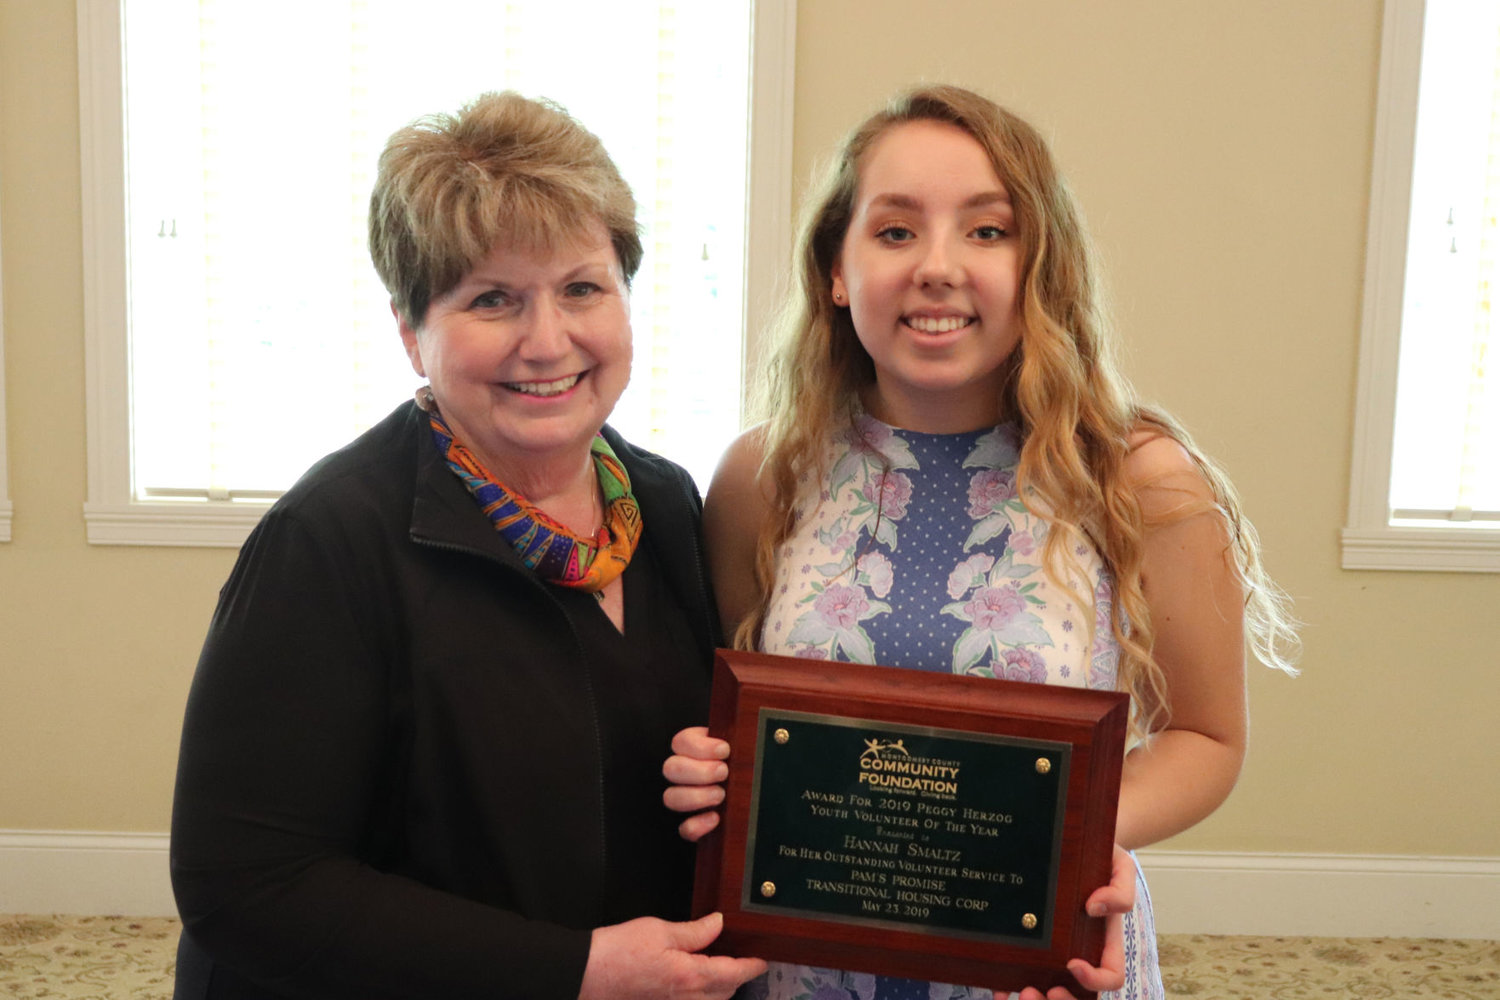 Peggy Herzog, left, presented the 2019 Peggy Herzog Youth Volunteer of the Year to Hannah Smaltz, a volunteer at Pam’s Promise Transitional Housing. As part of the recognition, MCCF presented a $1,000 to Pam’s Promise in honor of Hannah’s service.